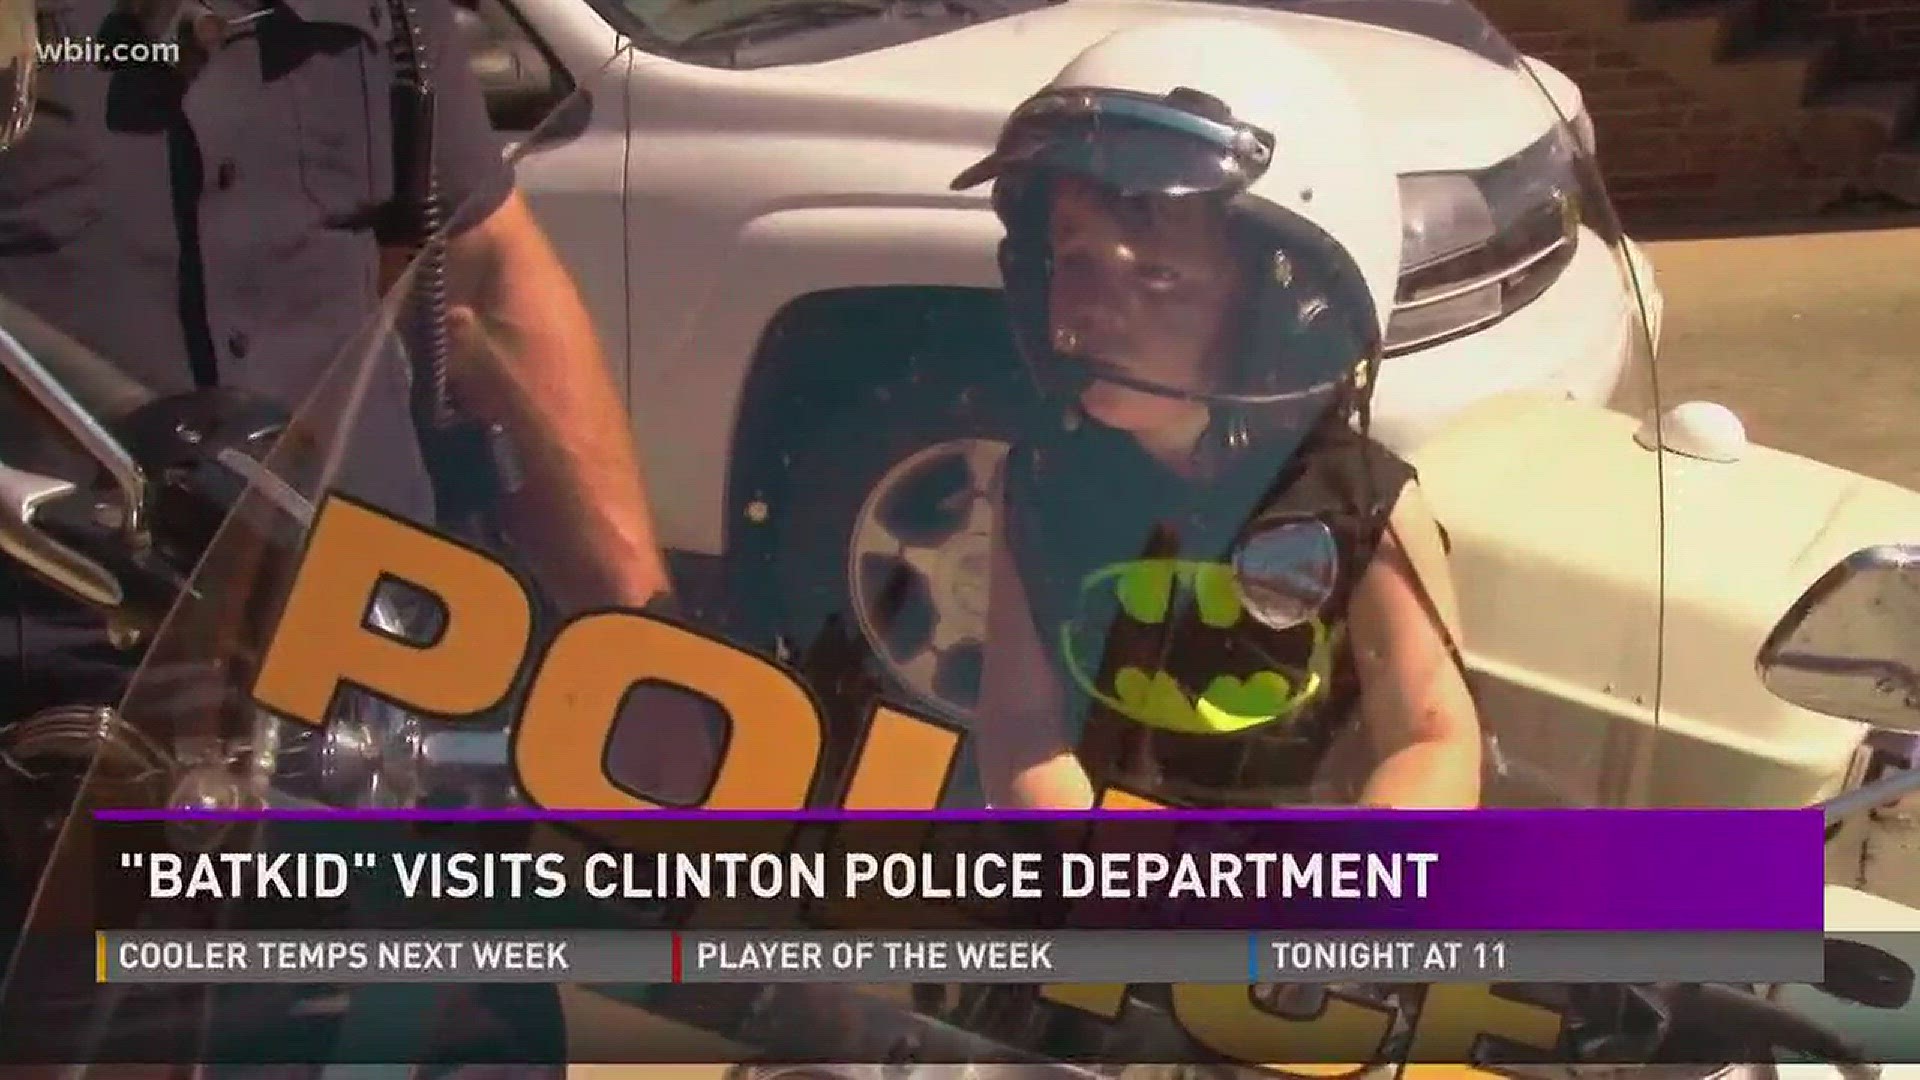 Oct. 5, 2017: 4-year-old Joshua Collins - Batkid - made a visit to the Clinton Police Department.